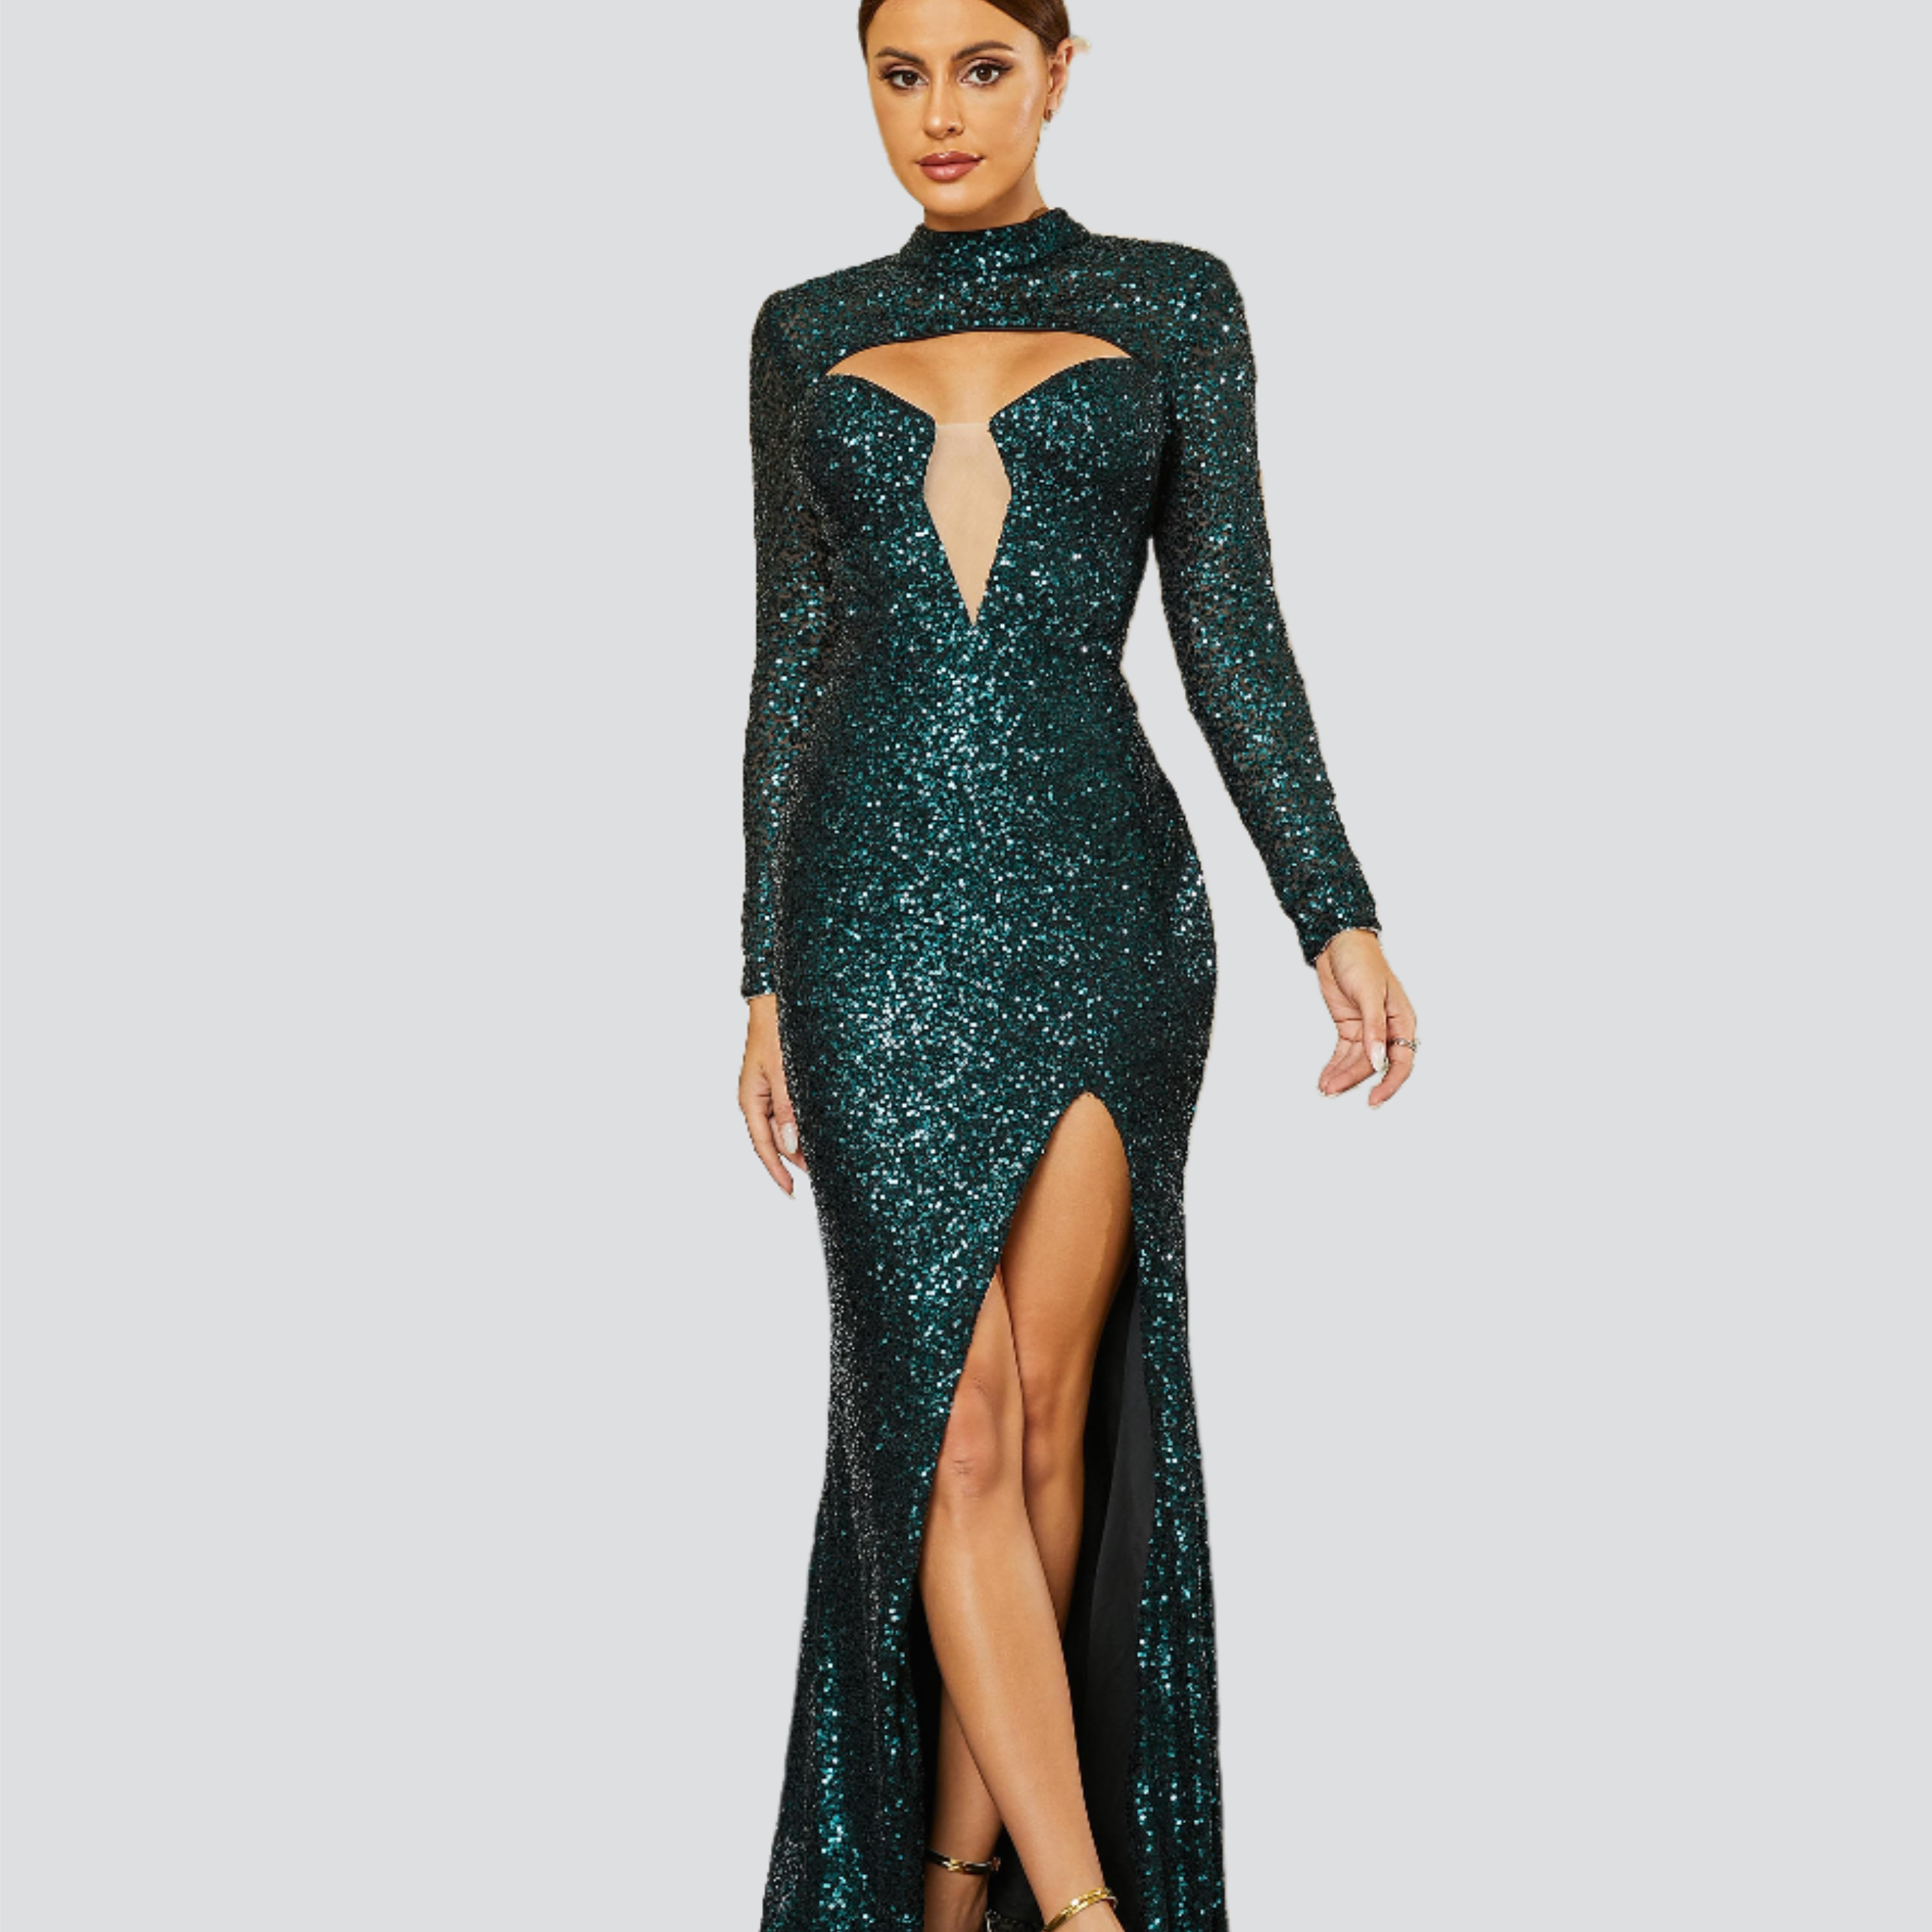 Lace Up Open Back Cutout Sequin Green Prom Dress